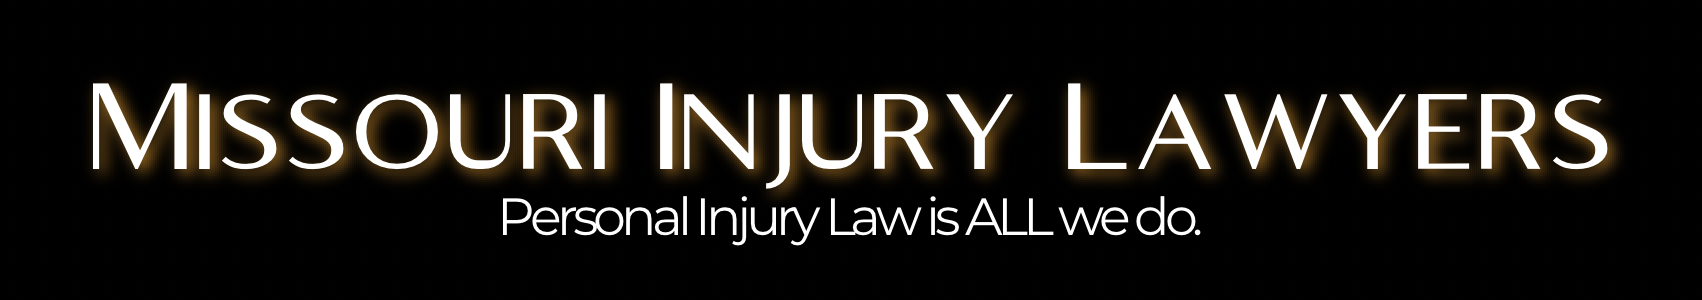 Missouri Injury Lawyers-Personal Injury Law is all we do